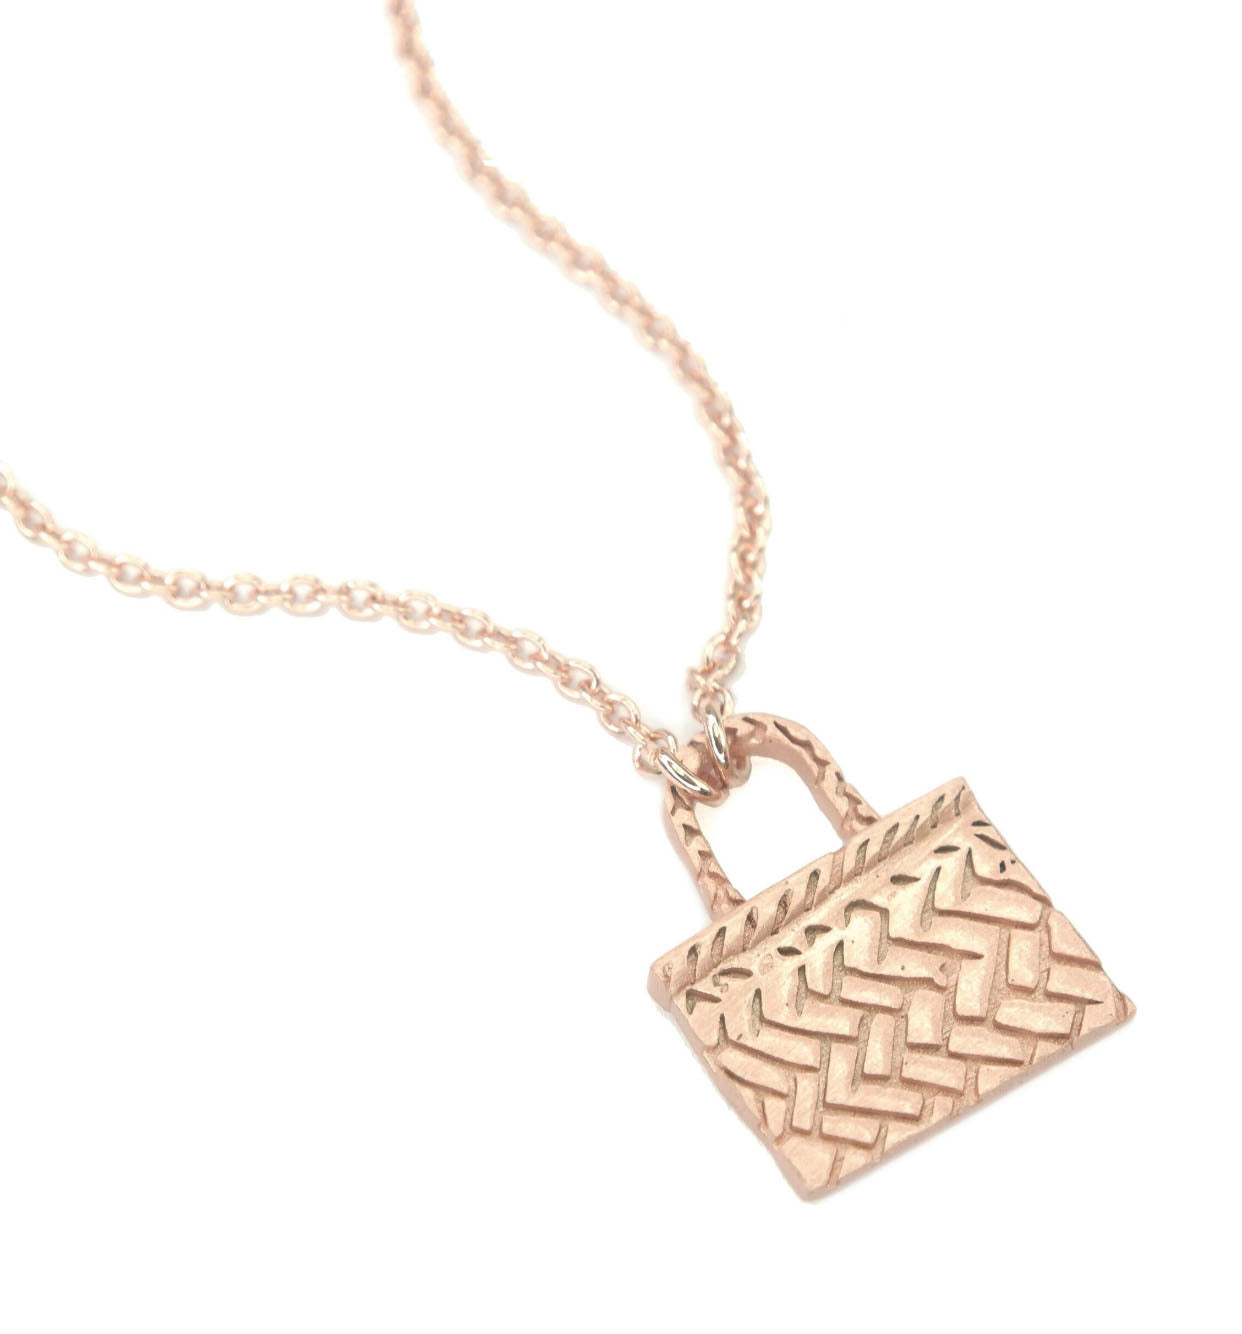 Kete Necklace